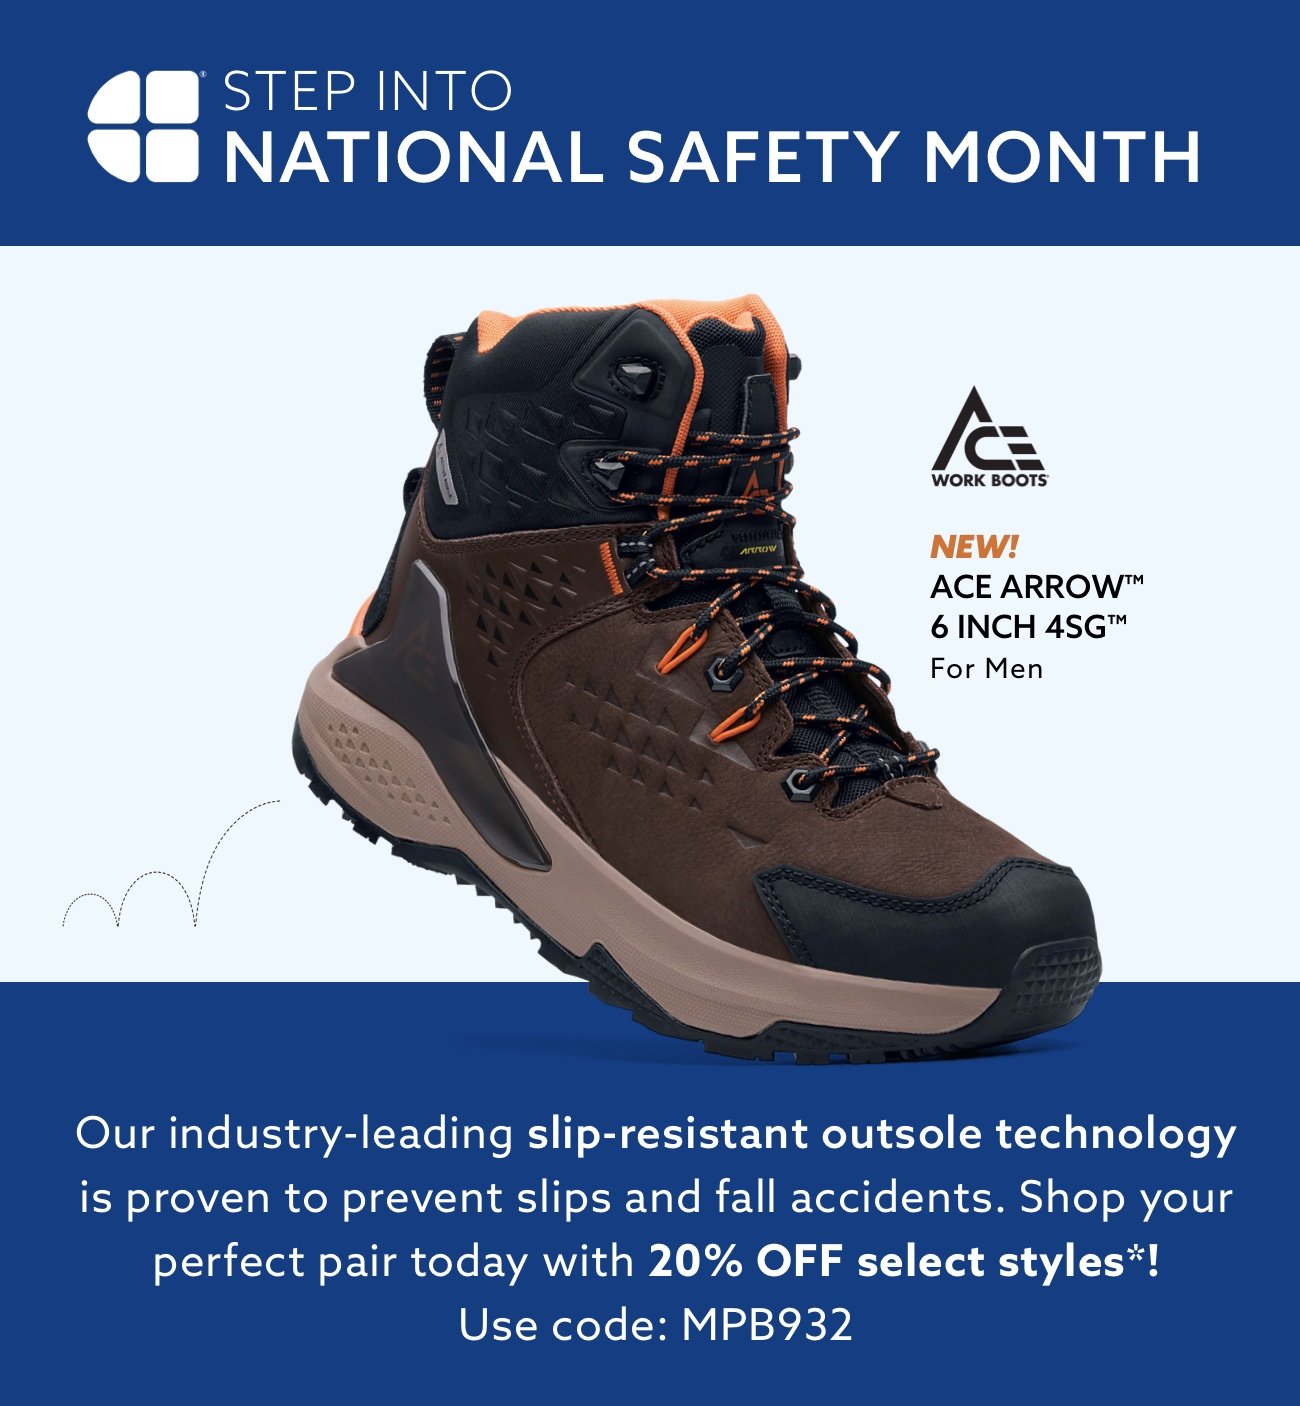 Step Into National Safety Month - SHOP NOW